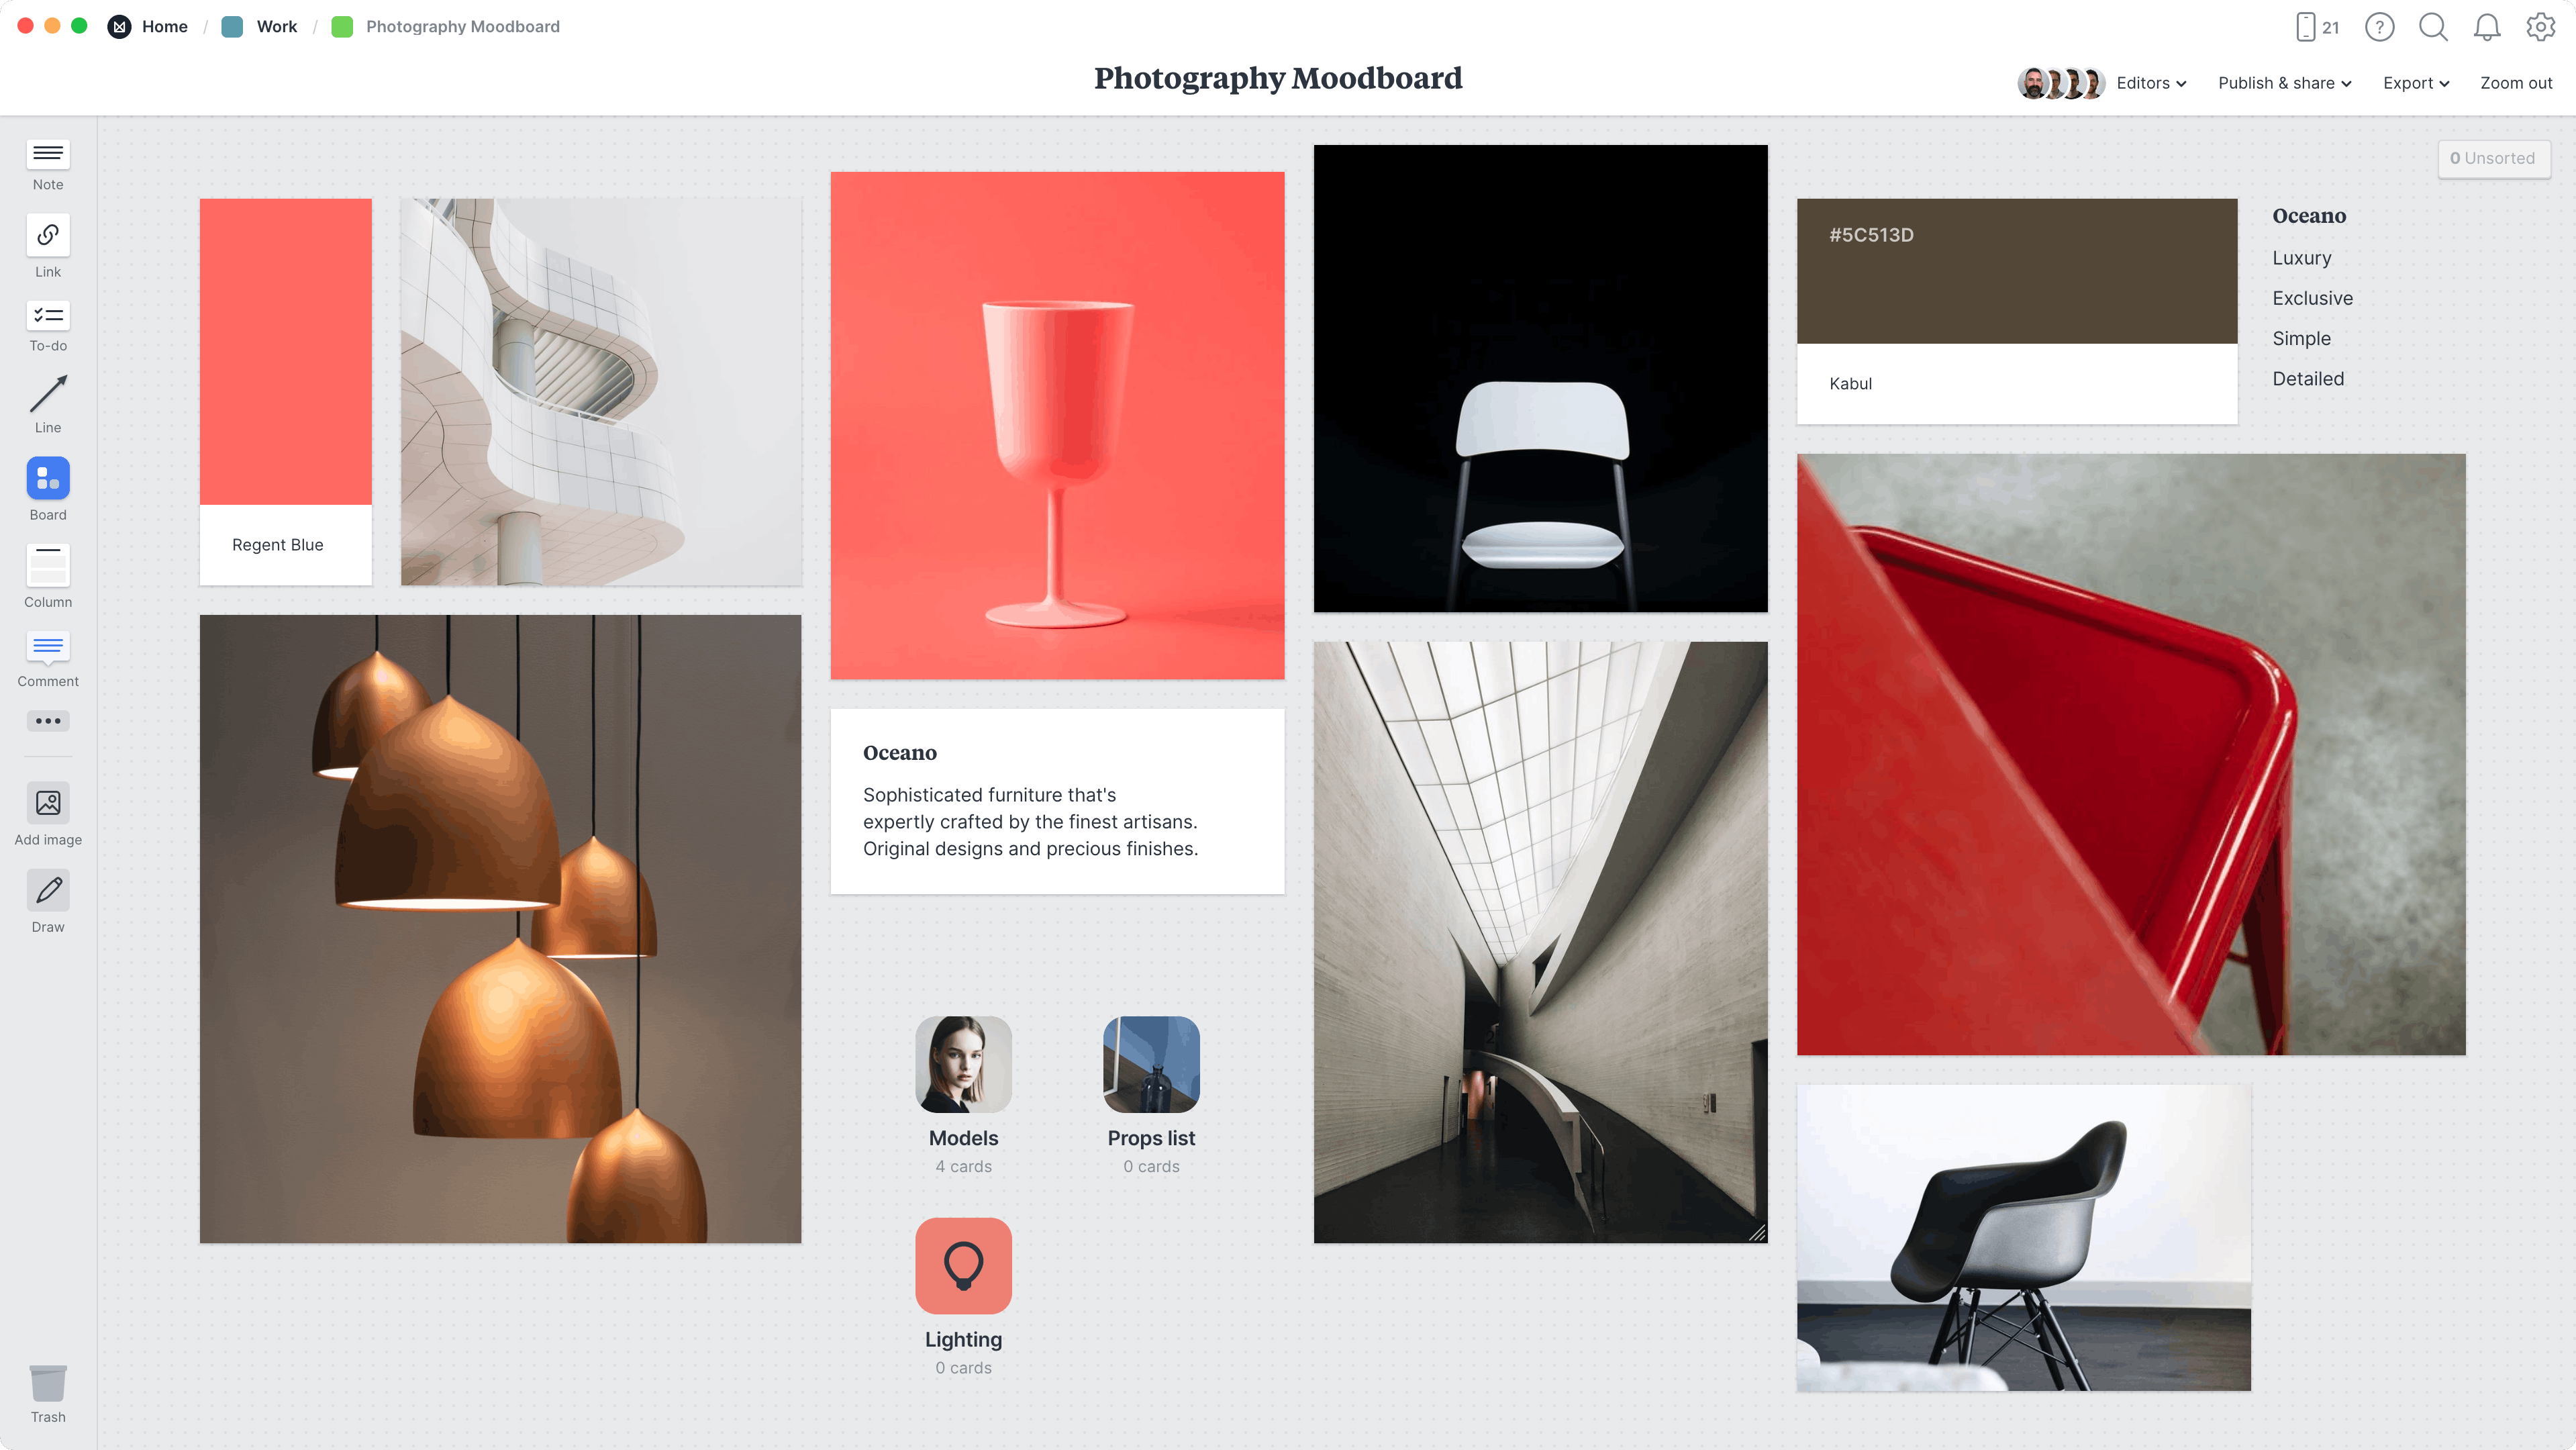 Photography Moodboard Template, within the Milanote app